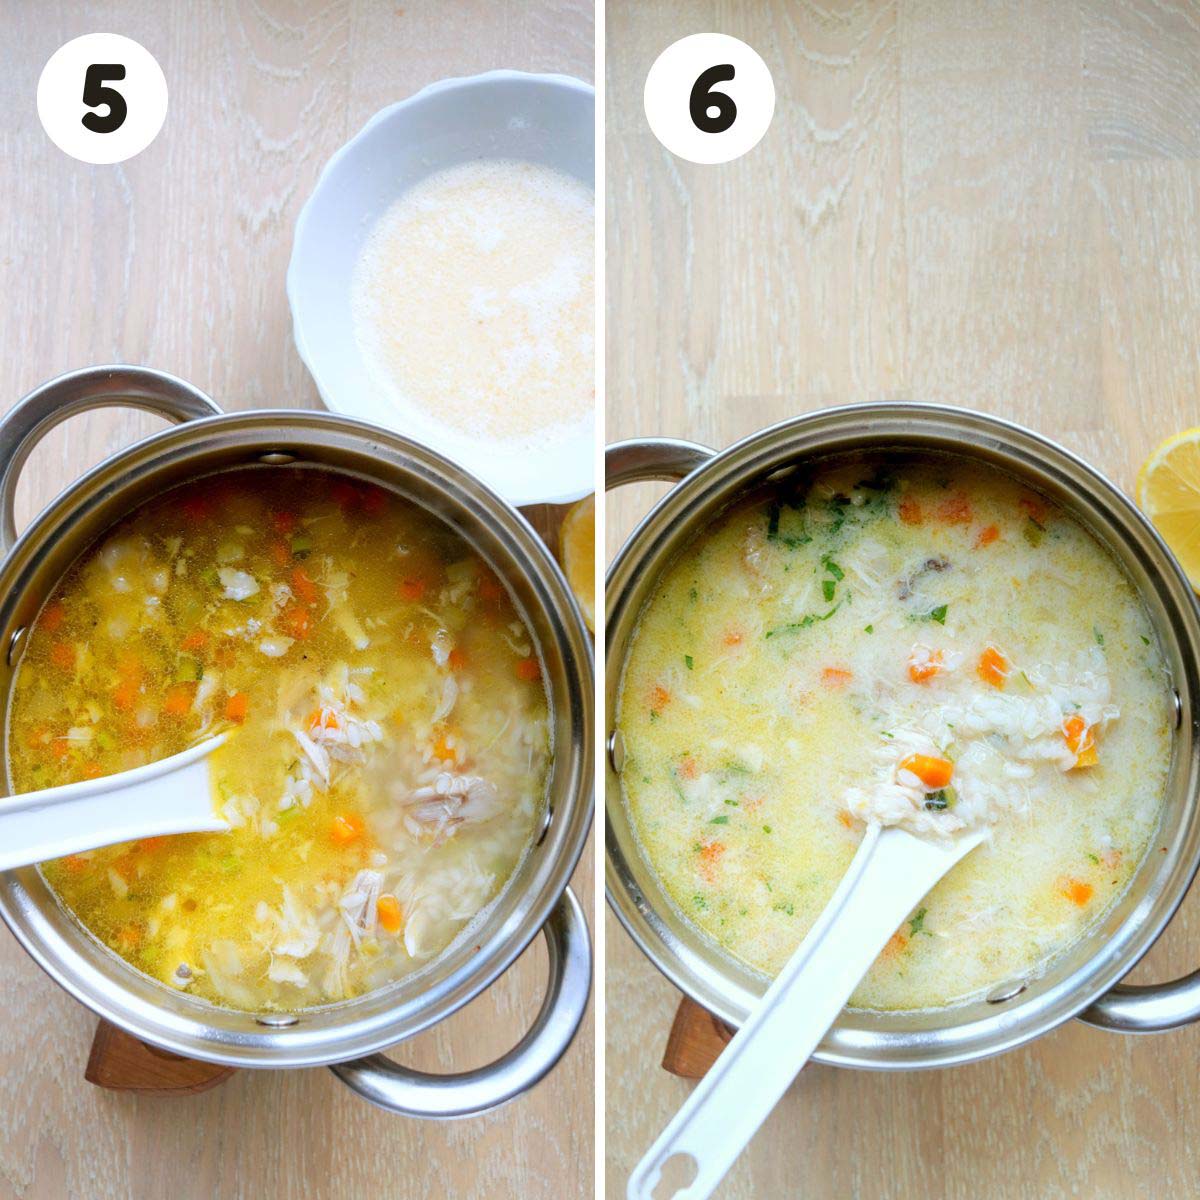 Steps of the soup in a pot.